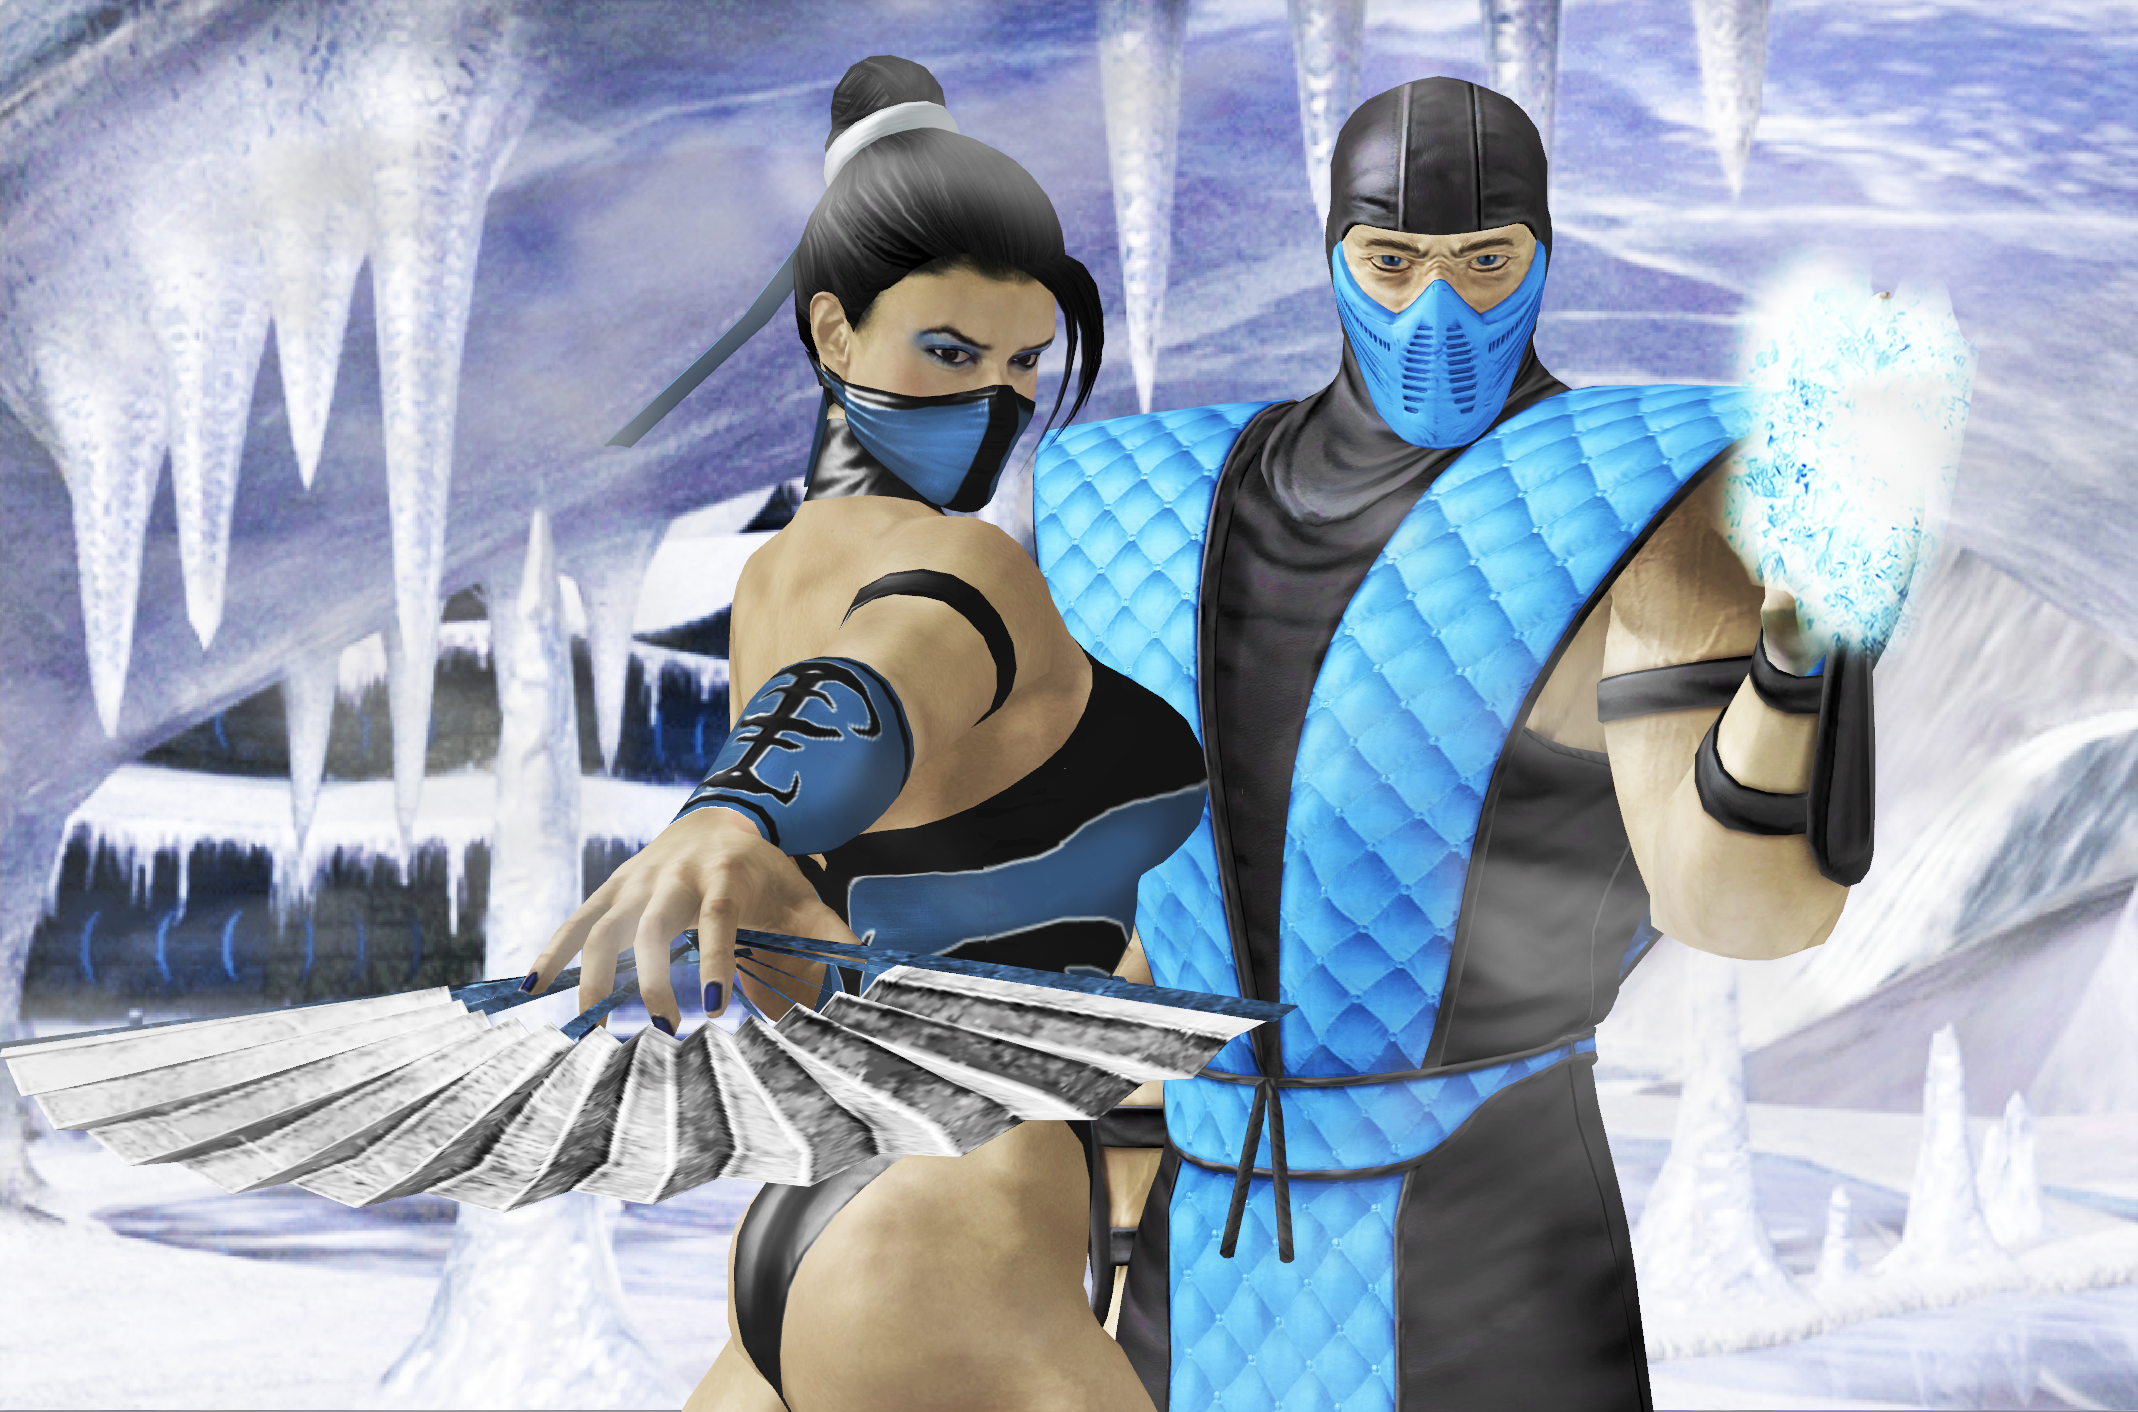 Sub-zero x Kitana: wee can see you... by Weskervit789 on Dev